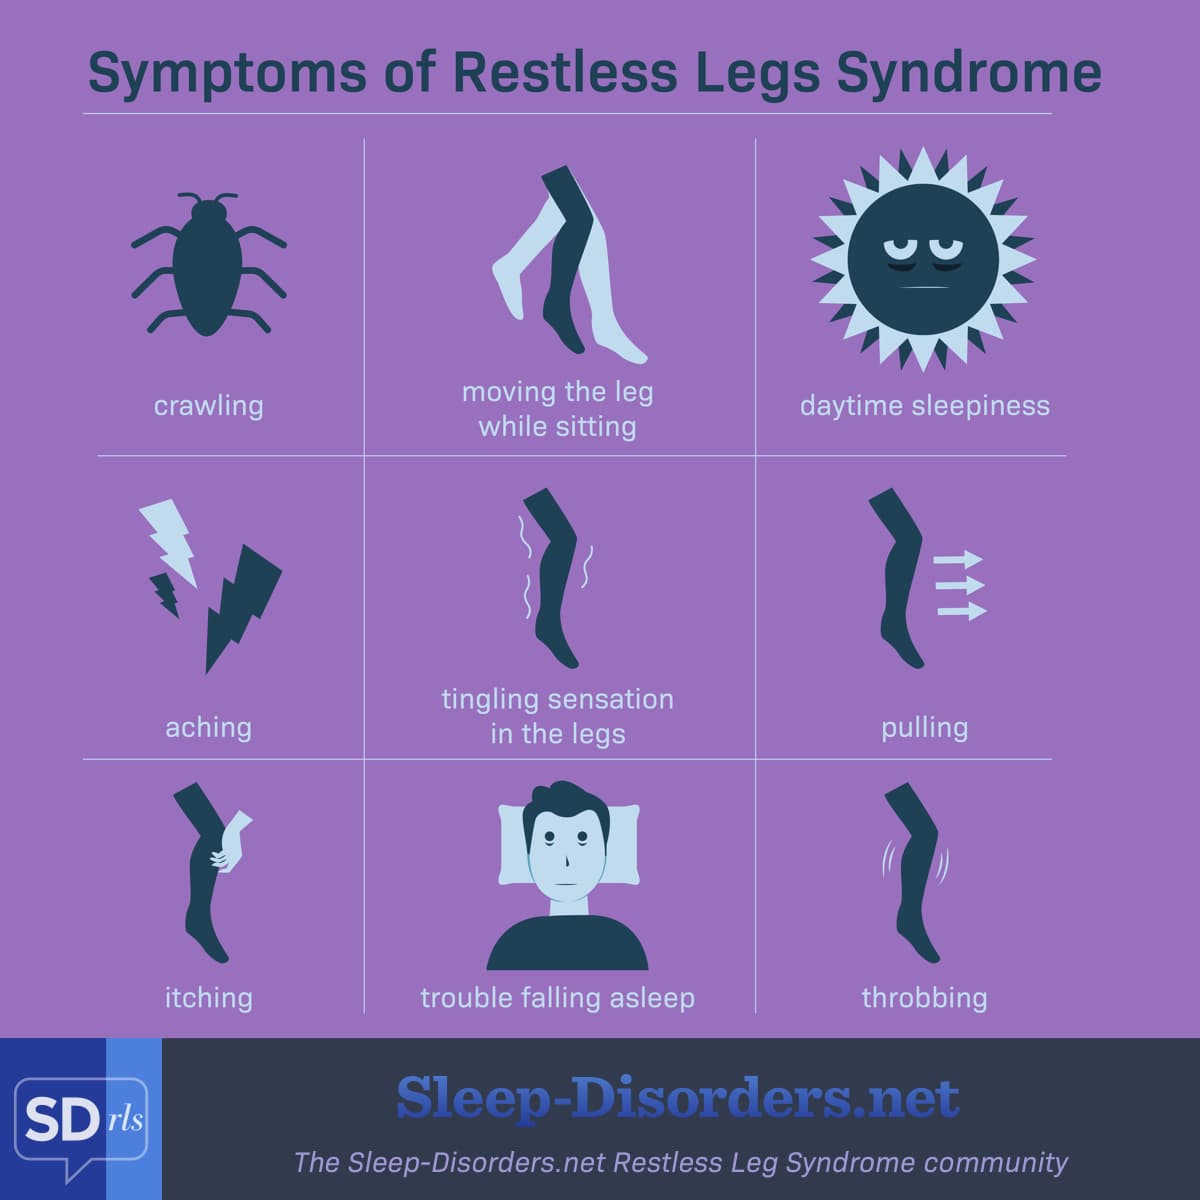 Common symptoms that affect people with Restless Legs Syndrome including trouble falling asleep, daytime sleepiness, and aching